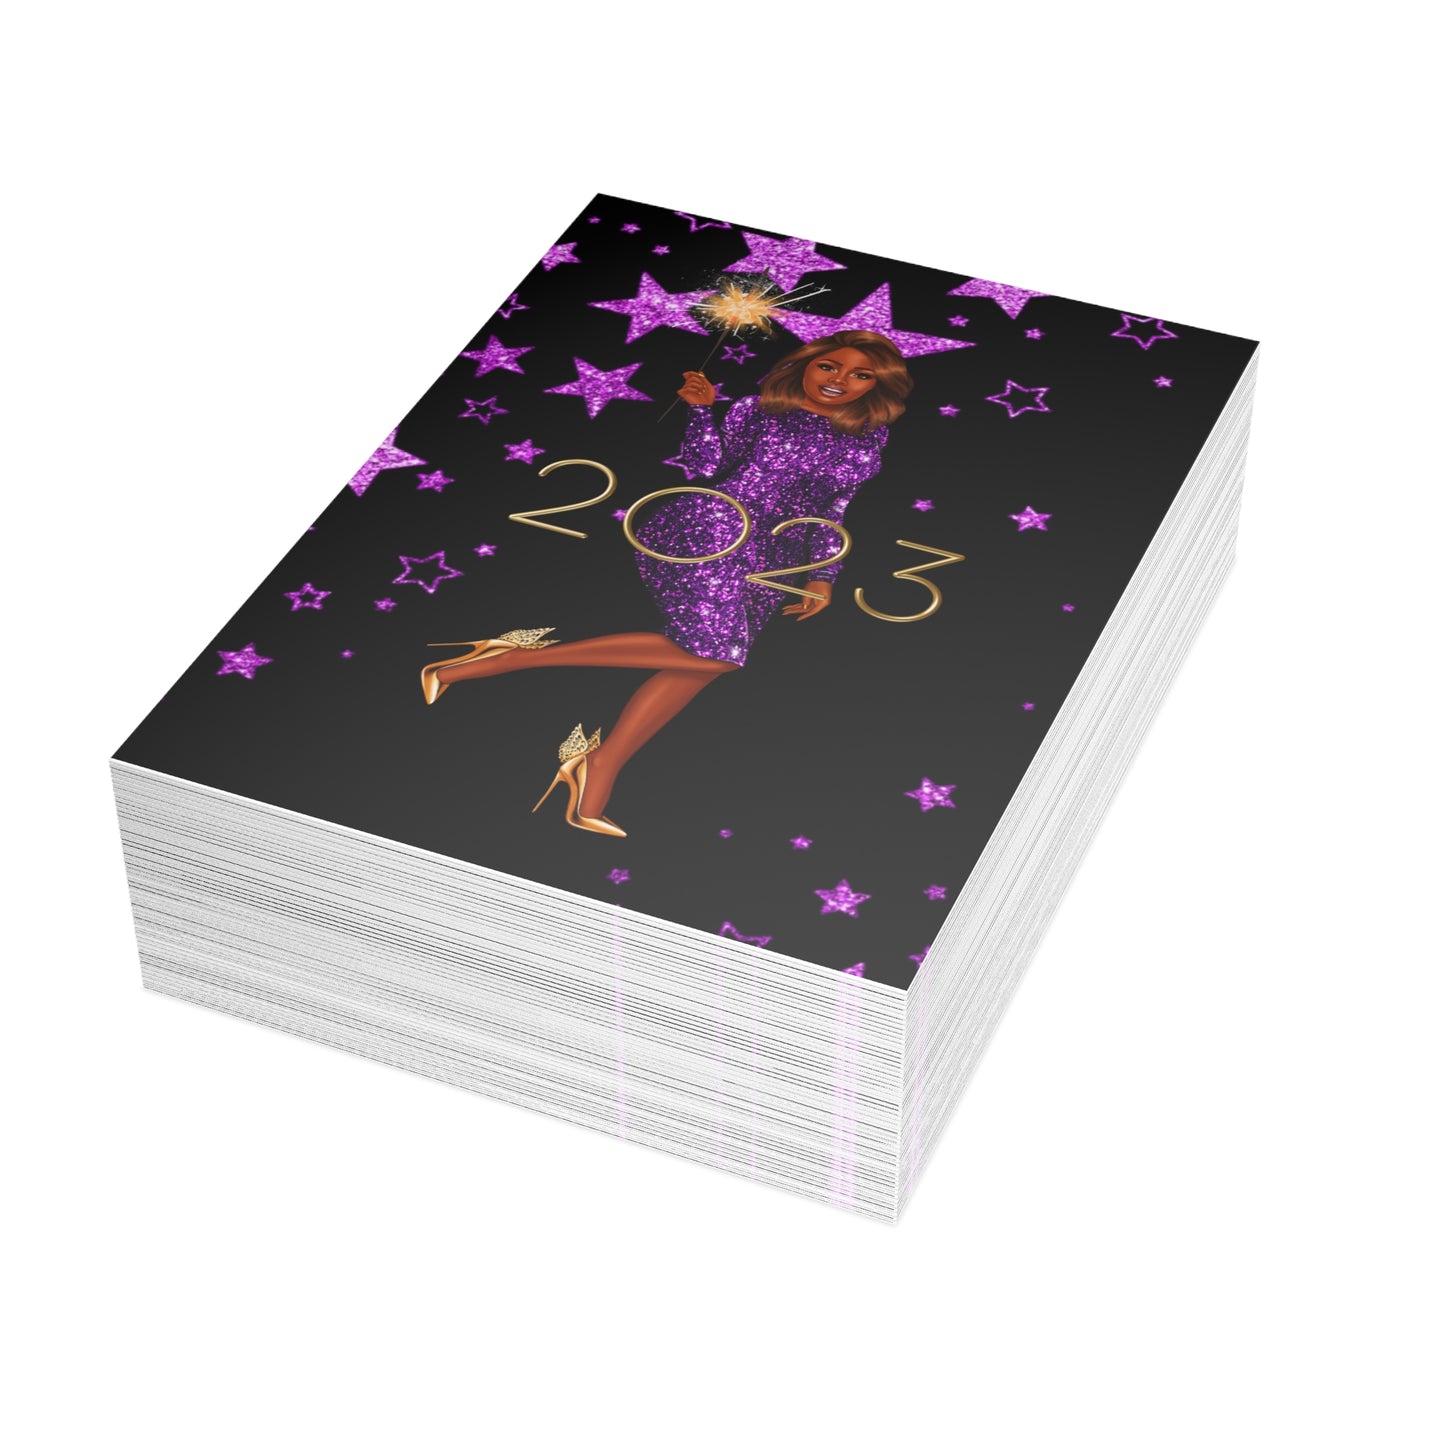 2023 New Years Cards| Folded Greeting Cards (1, 10, 30, and 50pcs)